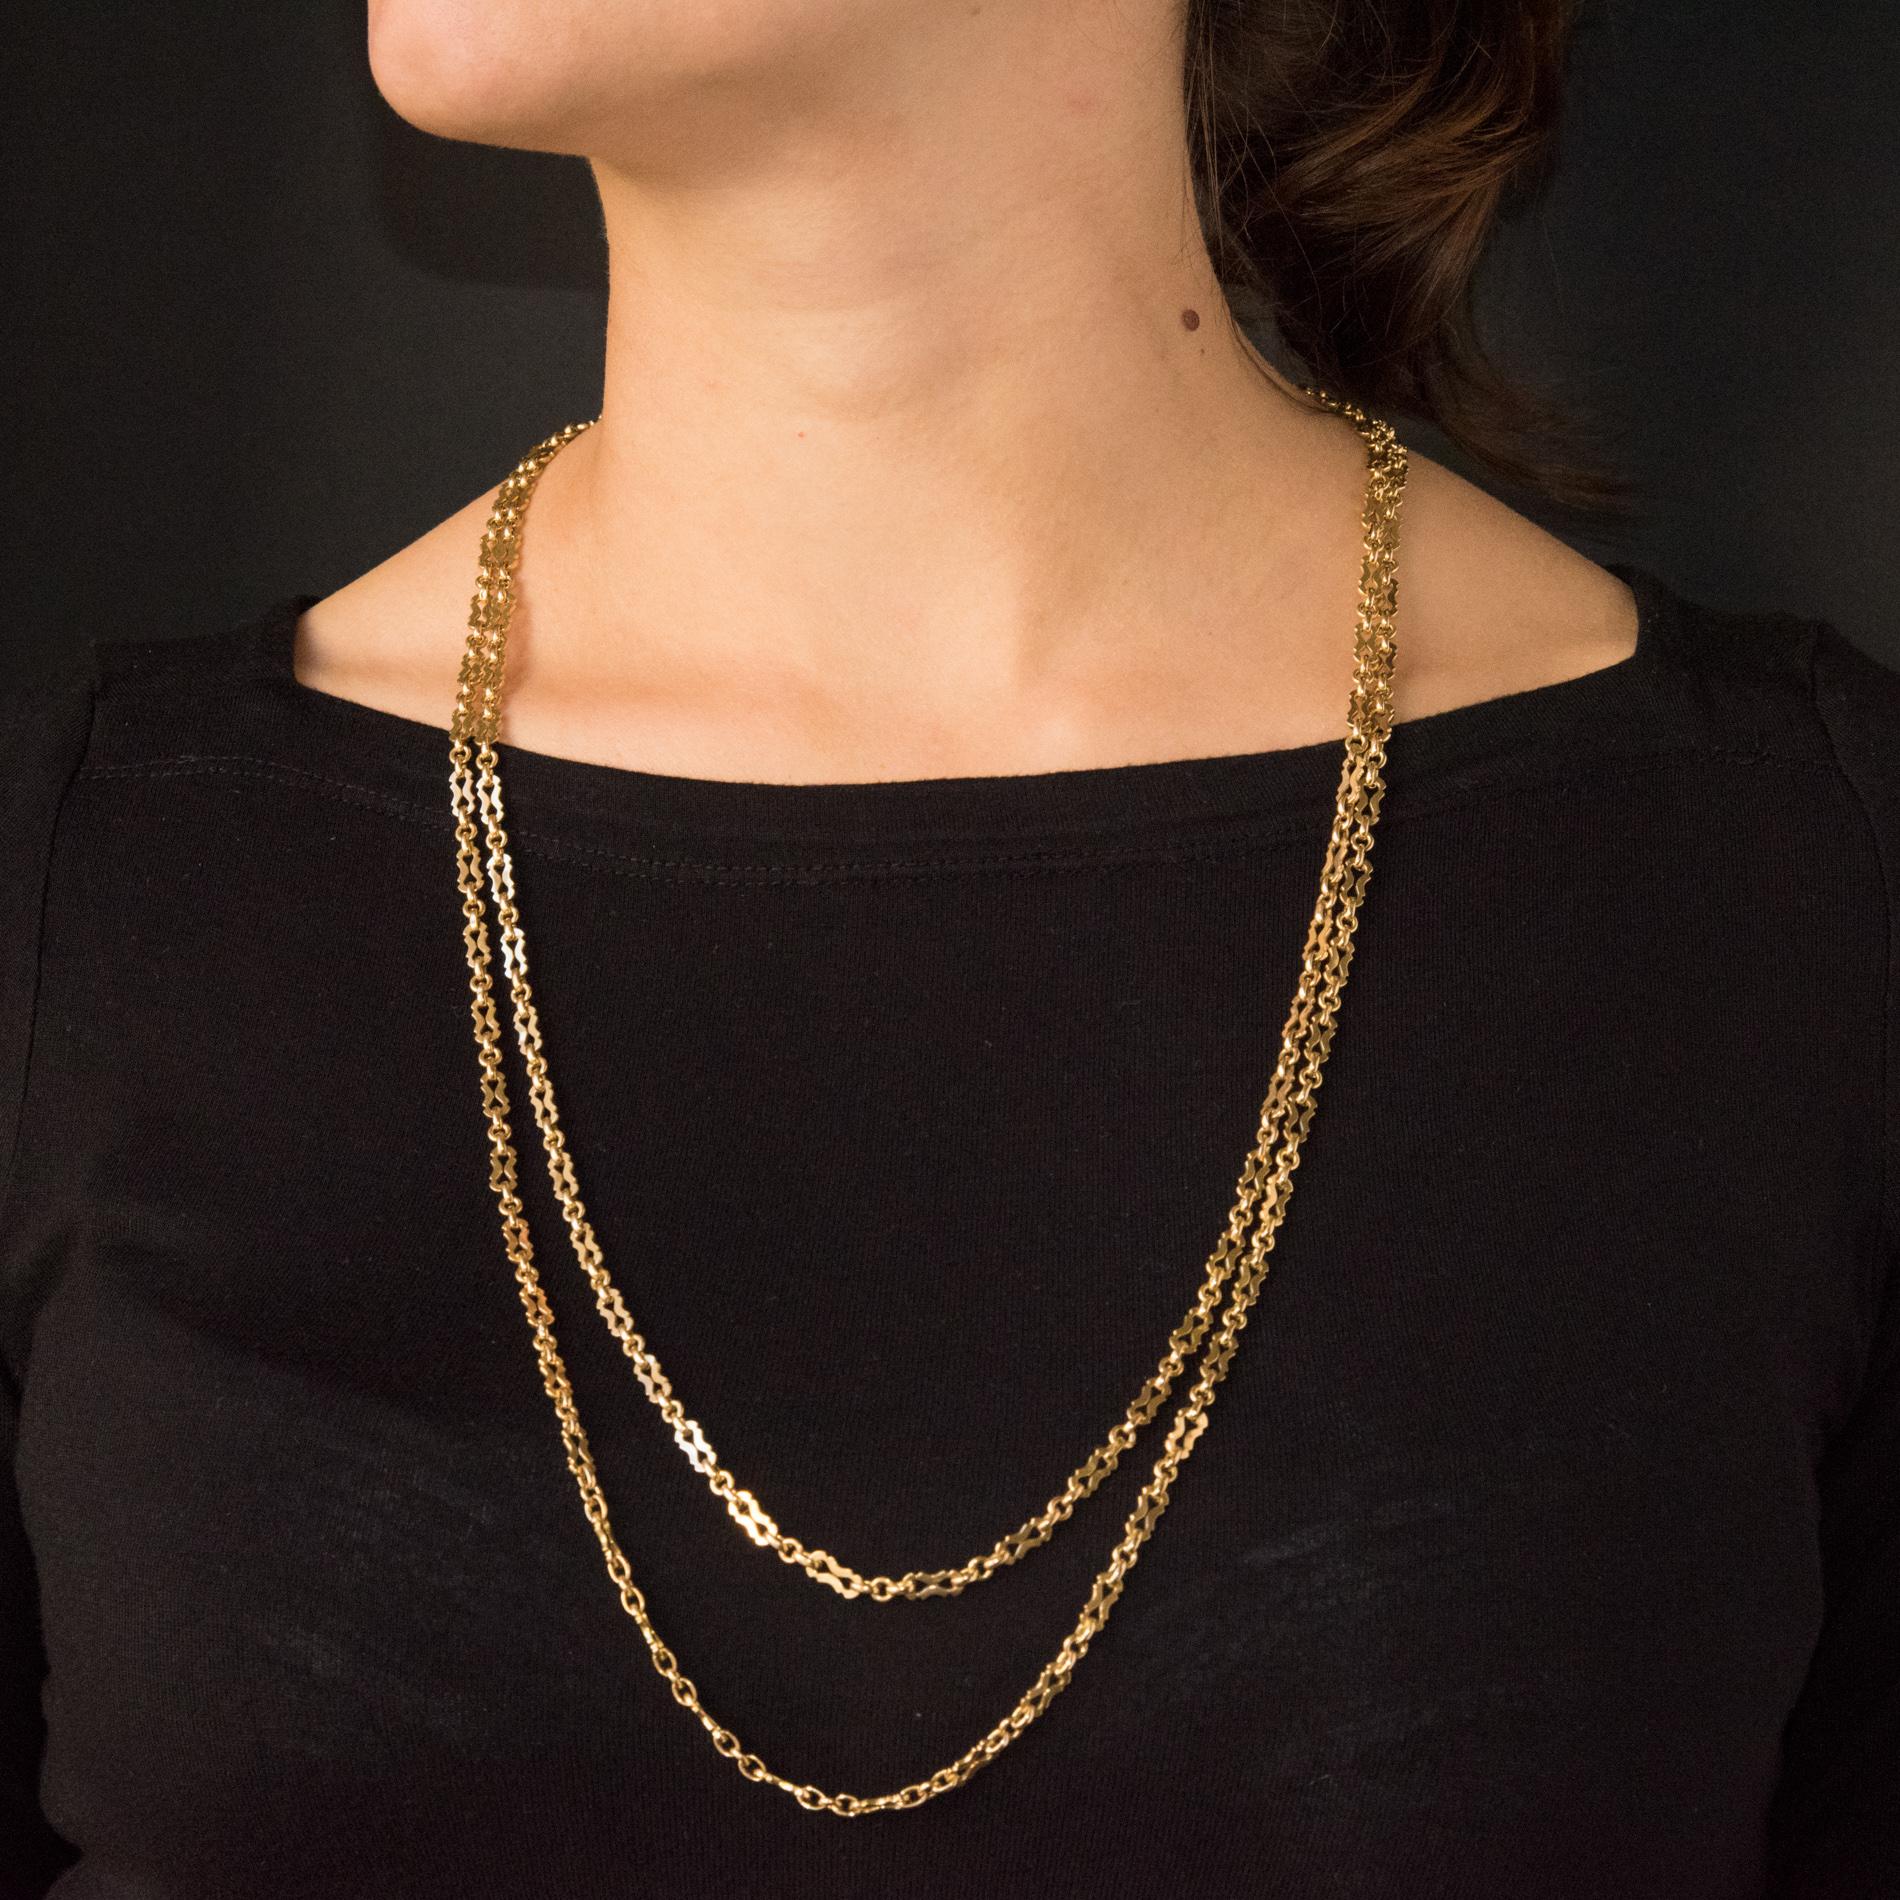 Long necklace in 18 karats yellow gold.
Lovely antique yellow gold chain, it is formed of a mesh made of patterns with slender lines retained between them by rings of gold. A spring ring is attached to carry the jumper in several rows.
Length: 77